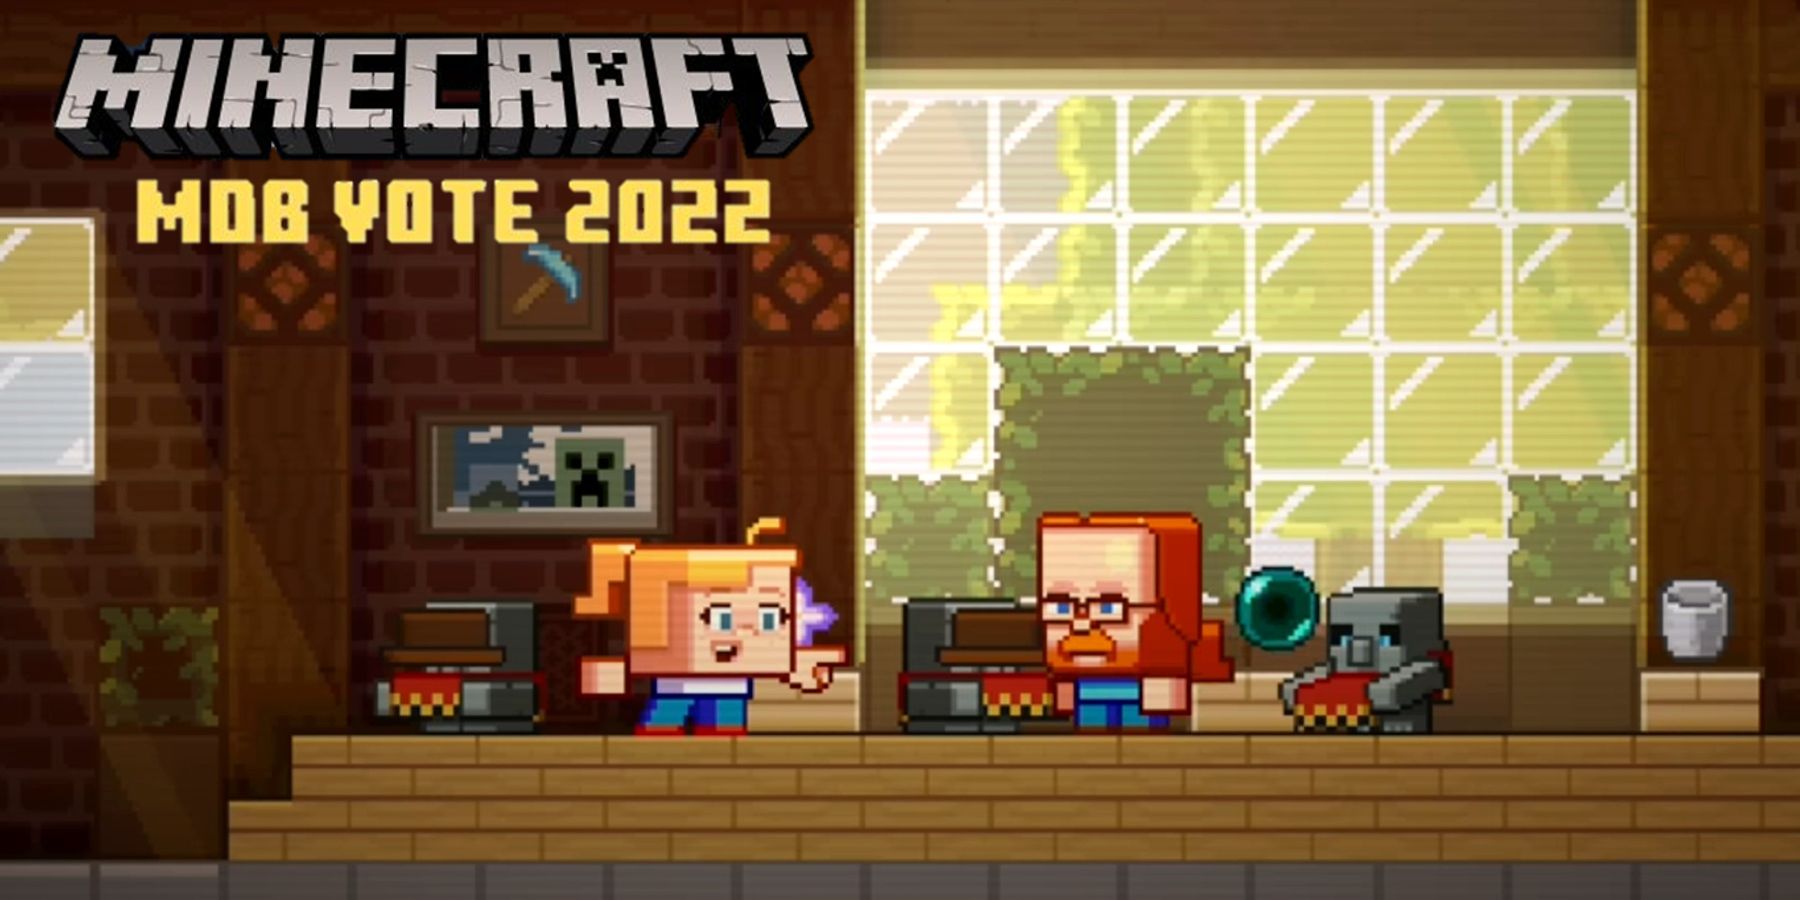 Minecraft Mob Vote 2022 What Are the Sniffer, Rascal, and Tuff Golem?